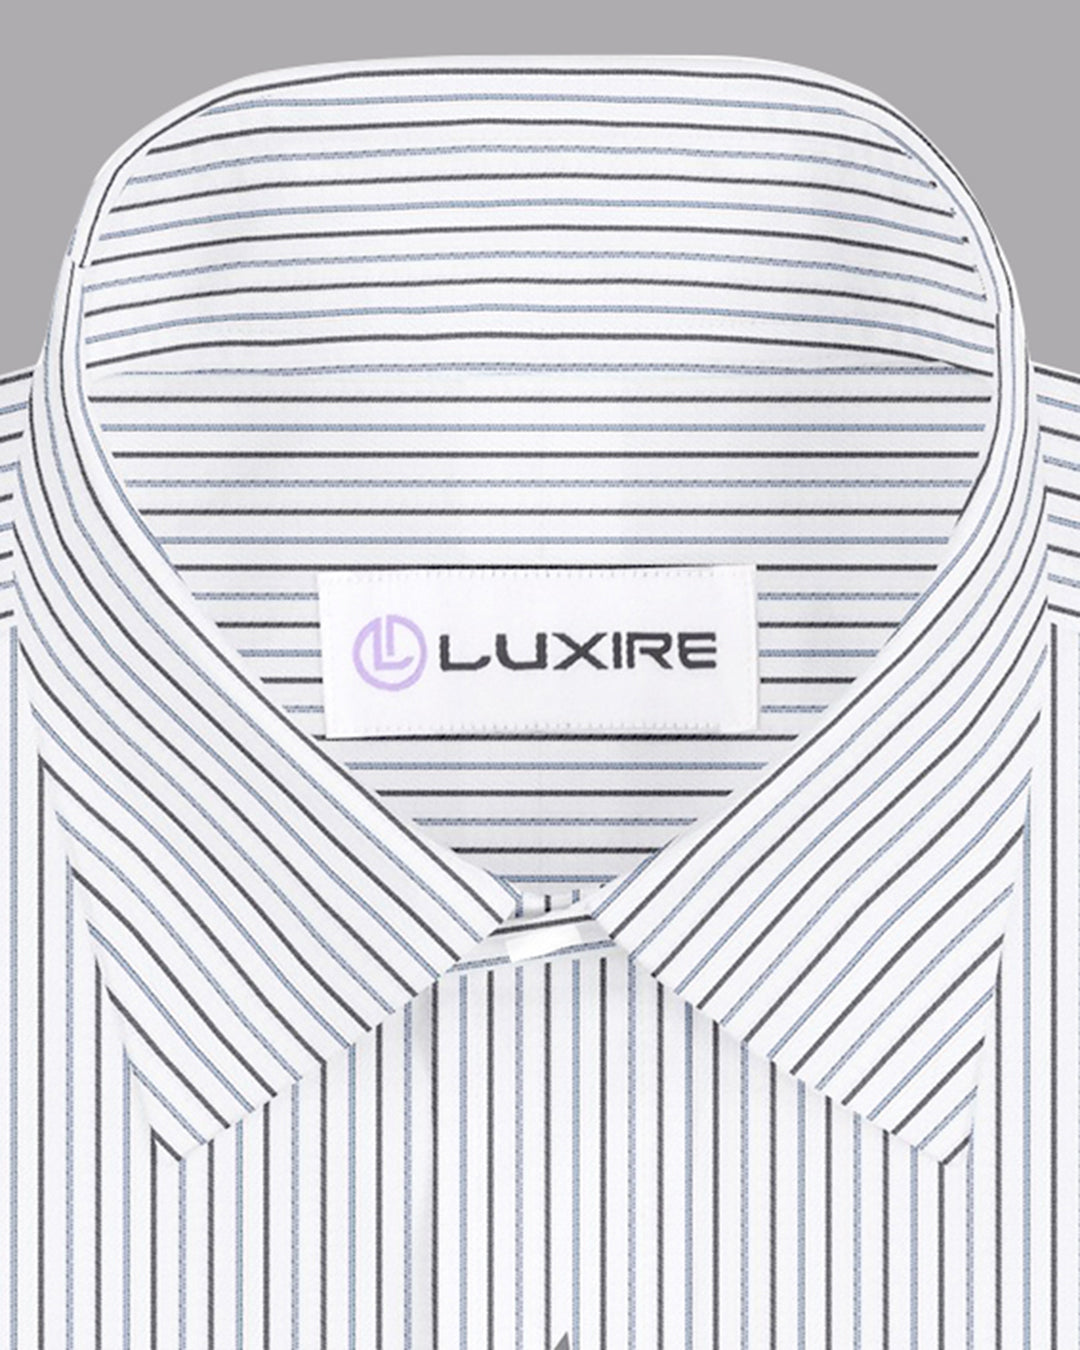 Collar of the custom linen shirt for men in white with black and blue stripes by Luxire Clothing